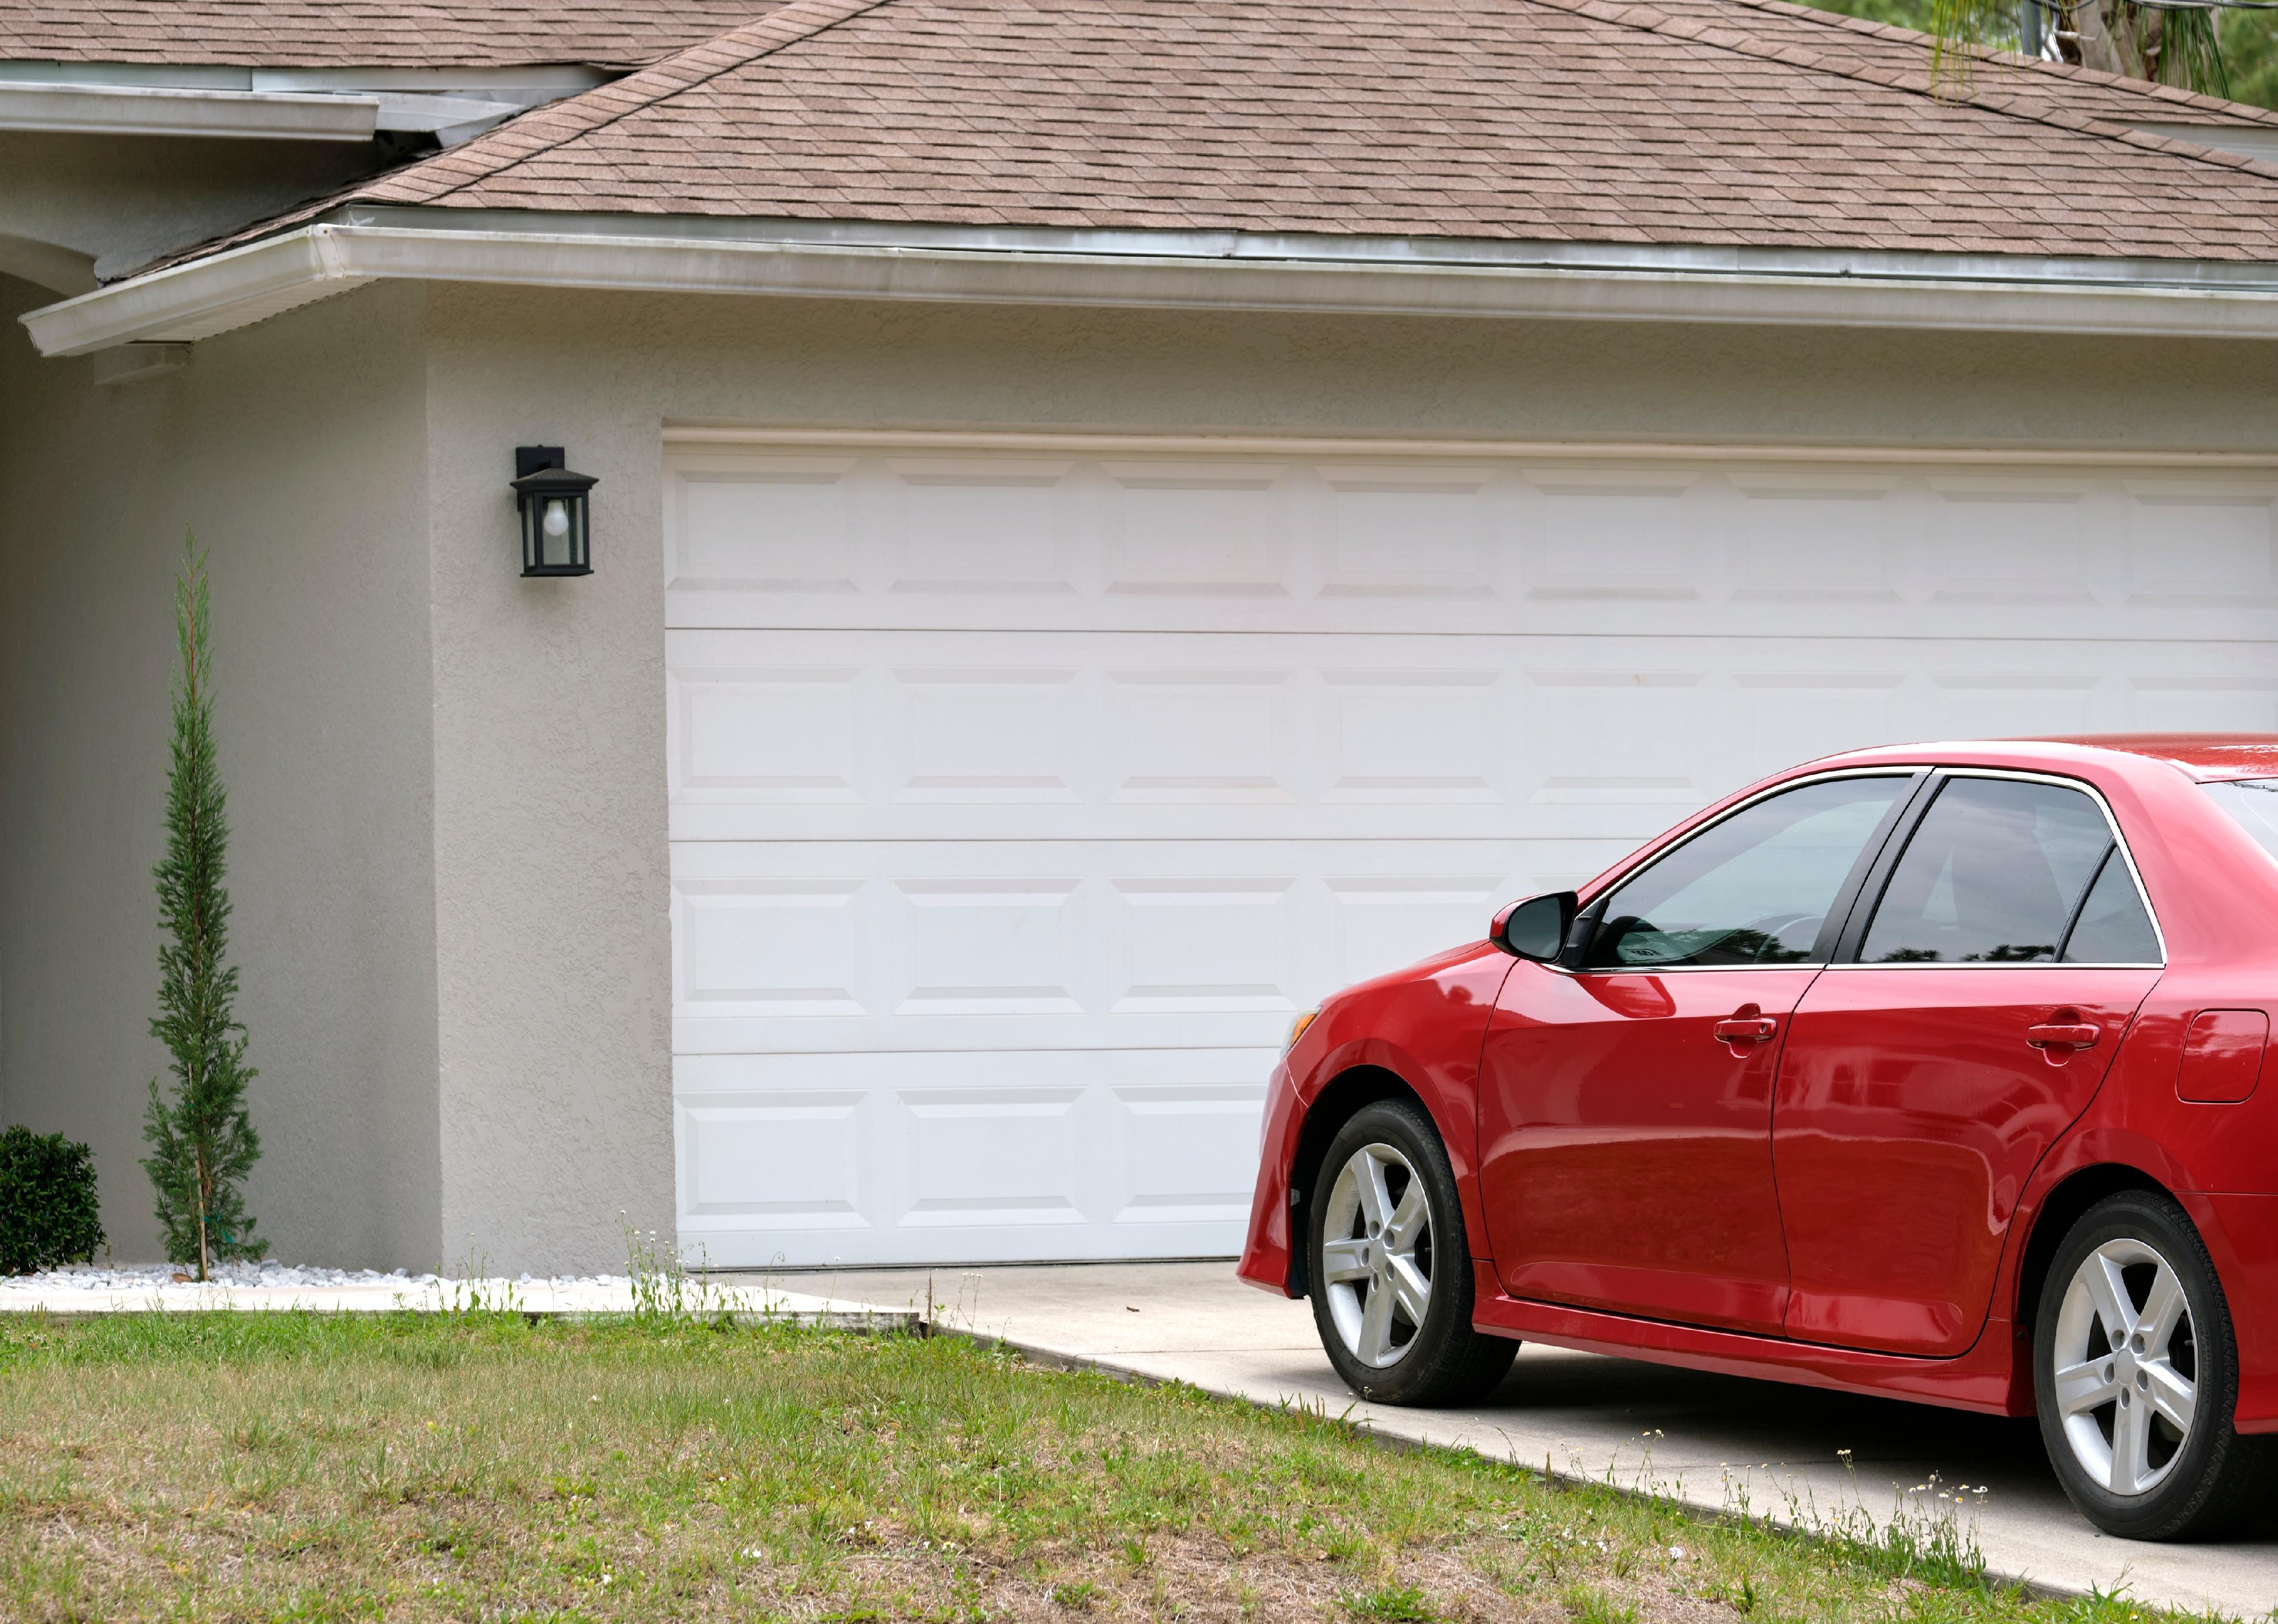 Car parked in front of wide garage double door on concrete driveway.